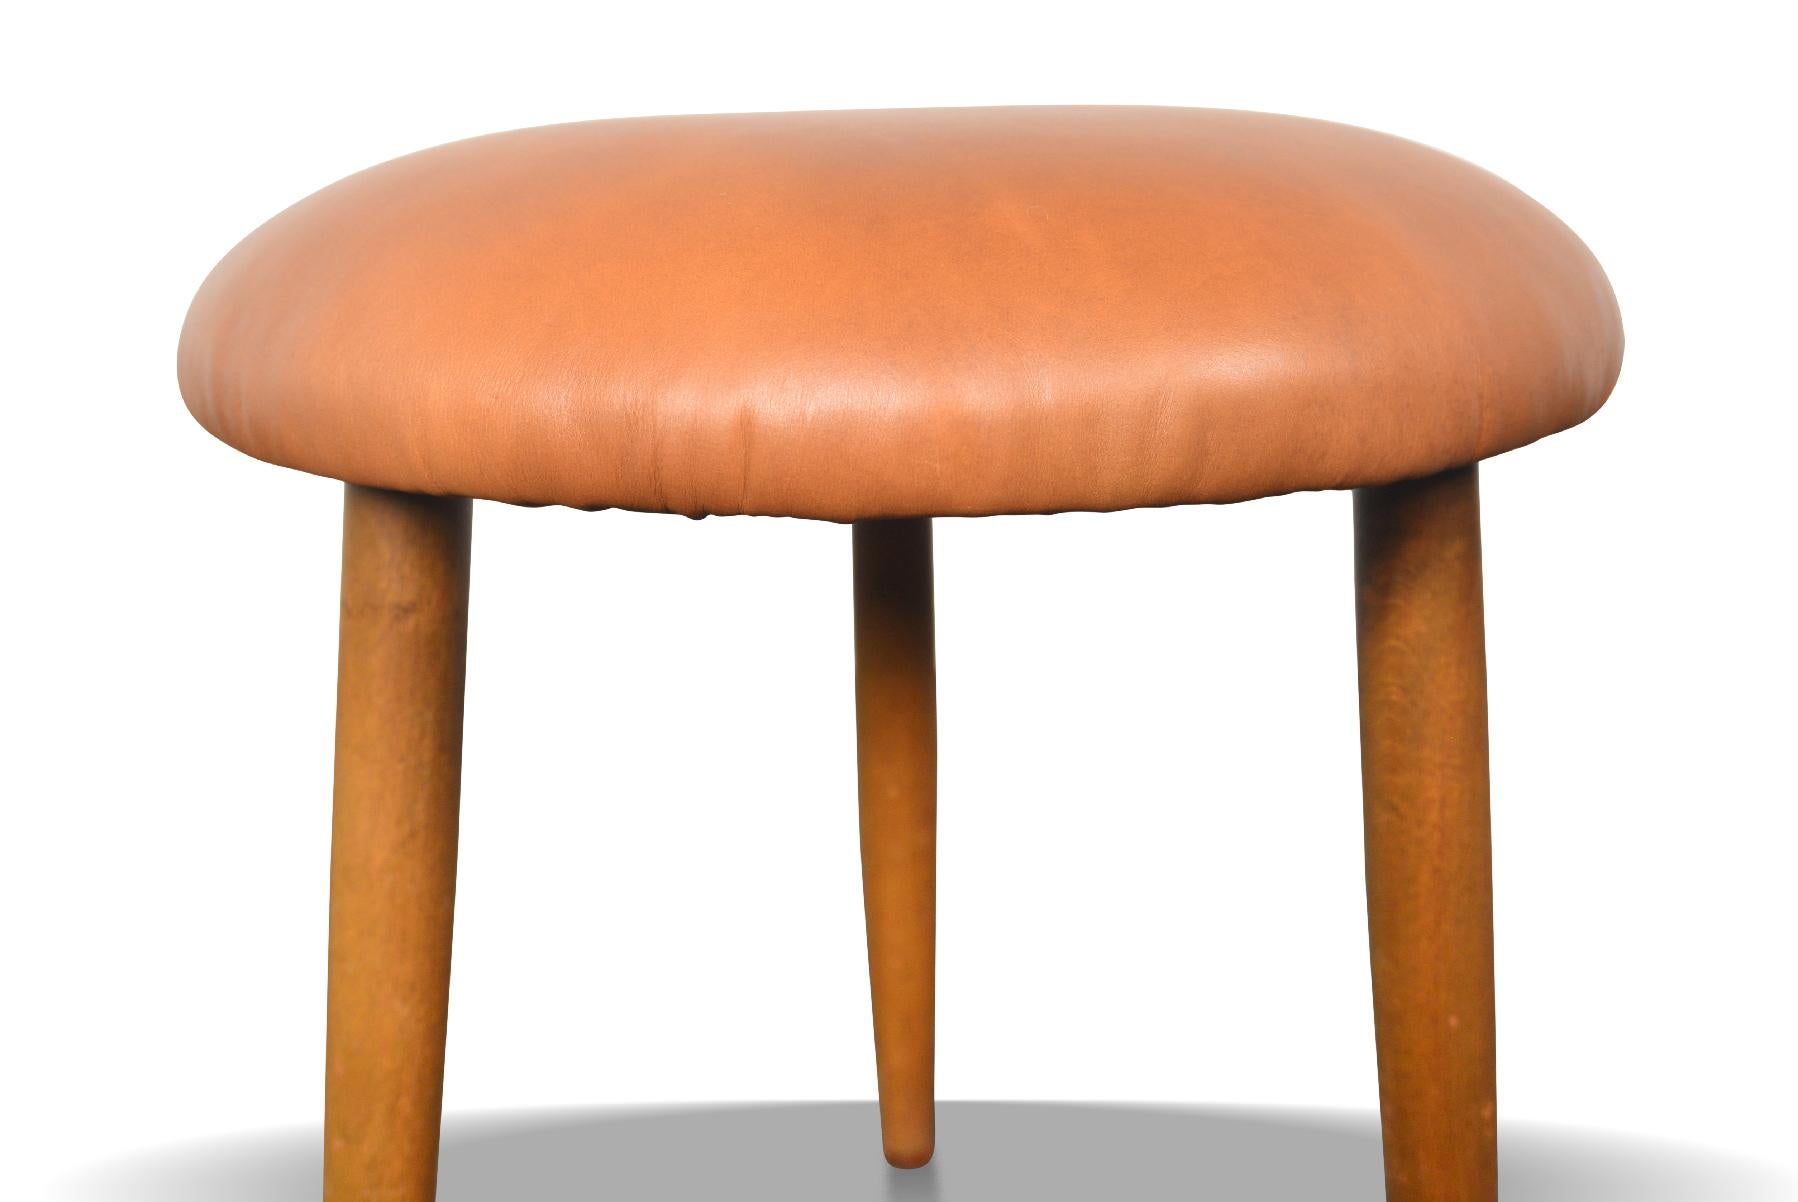 Origin: Denmark
Designer: Unknown
Manufacturer: Unknown
Era: 1960s
Materials: Leather, Teak
Measurements: 15.5″ wide x 15.5″ tall
CONDITION: Newly upholstered in cognac leather.  In excellent condition.